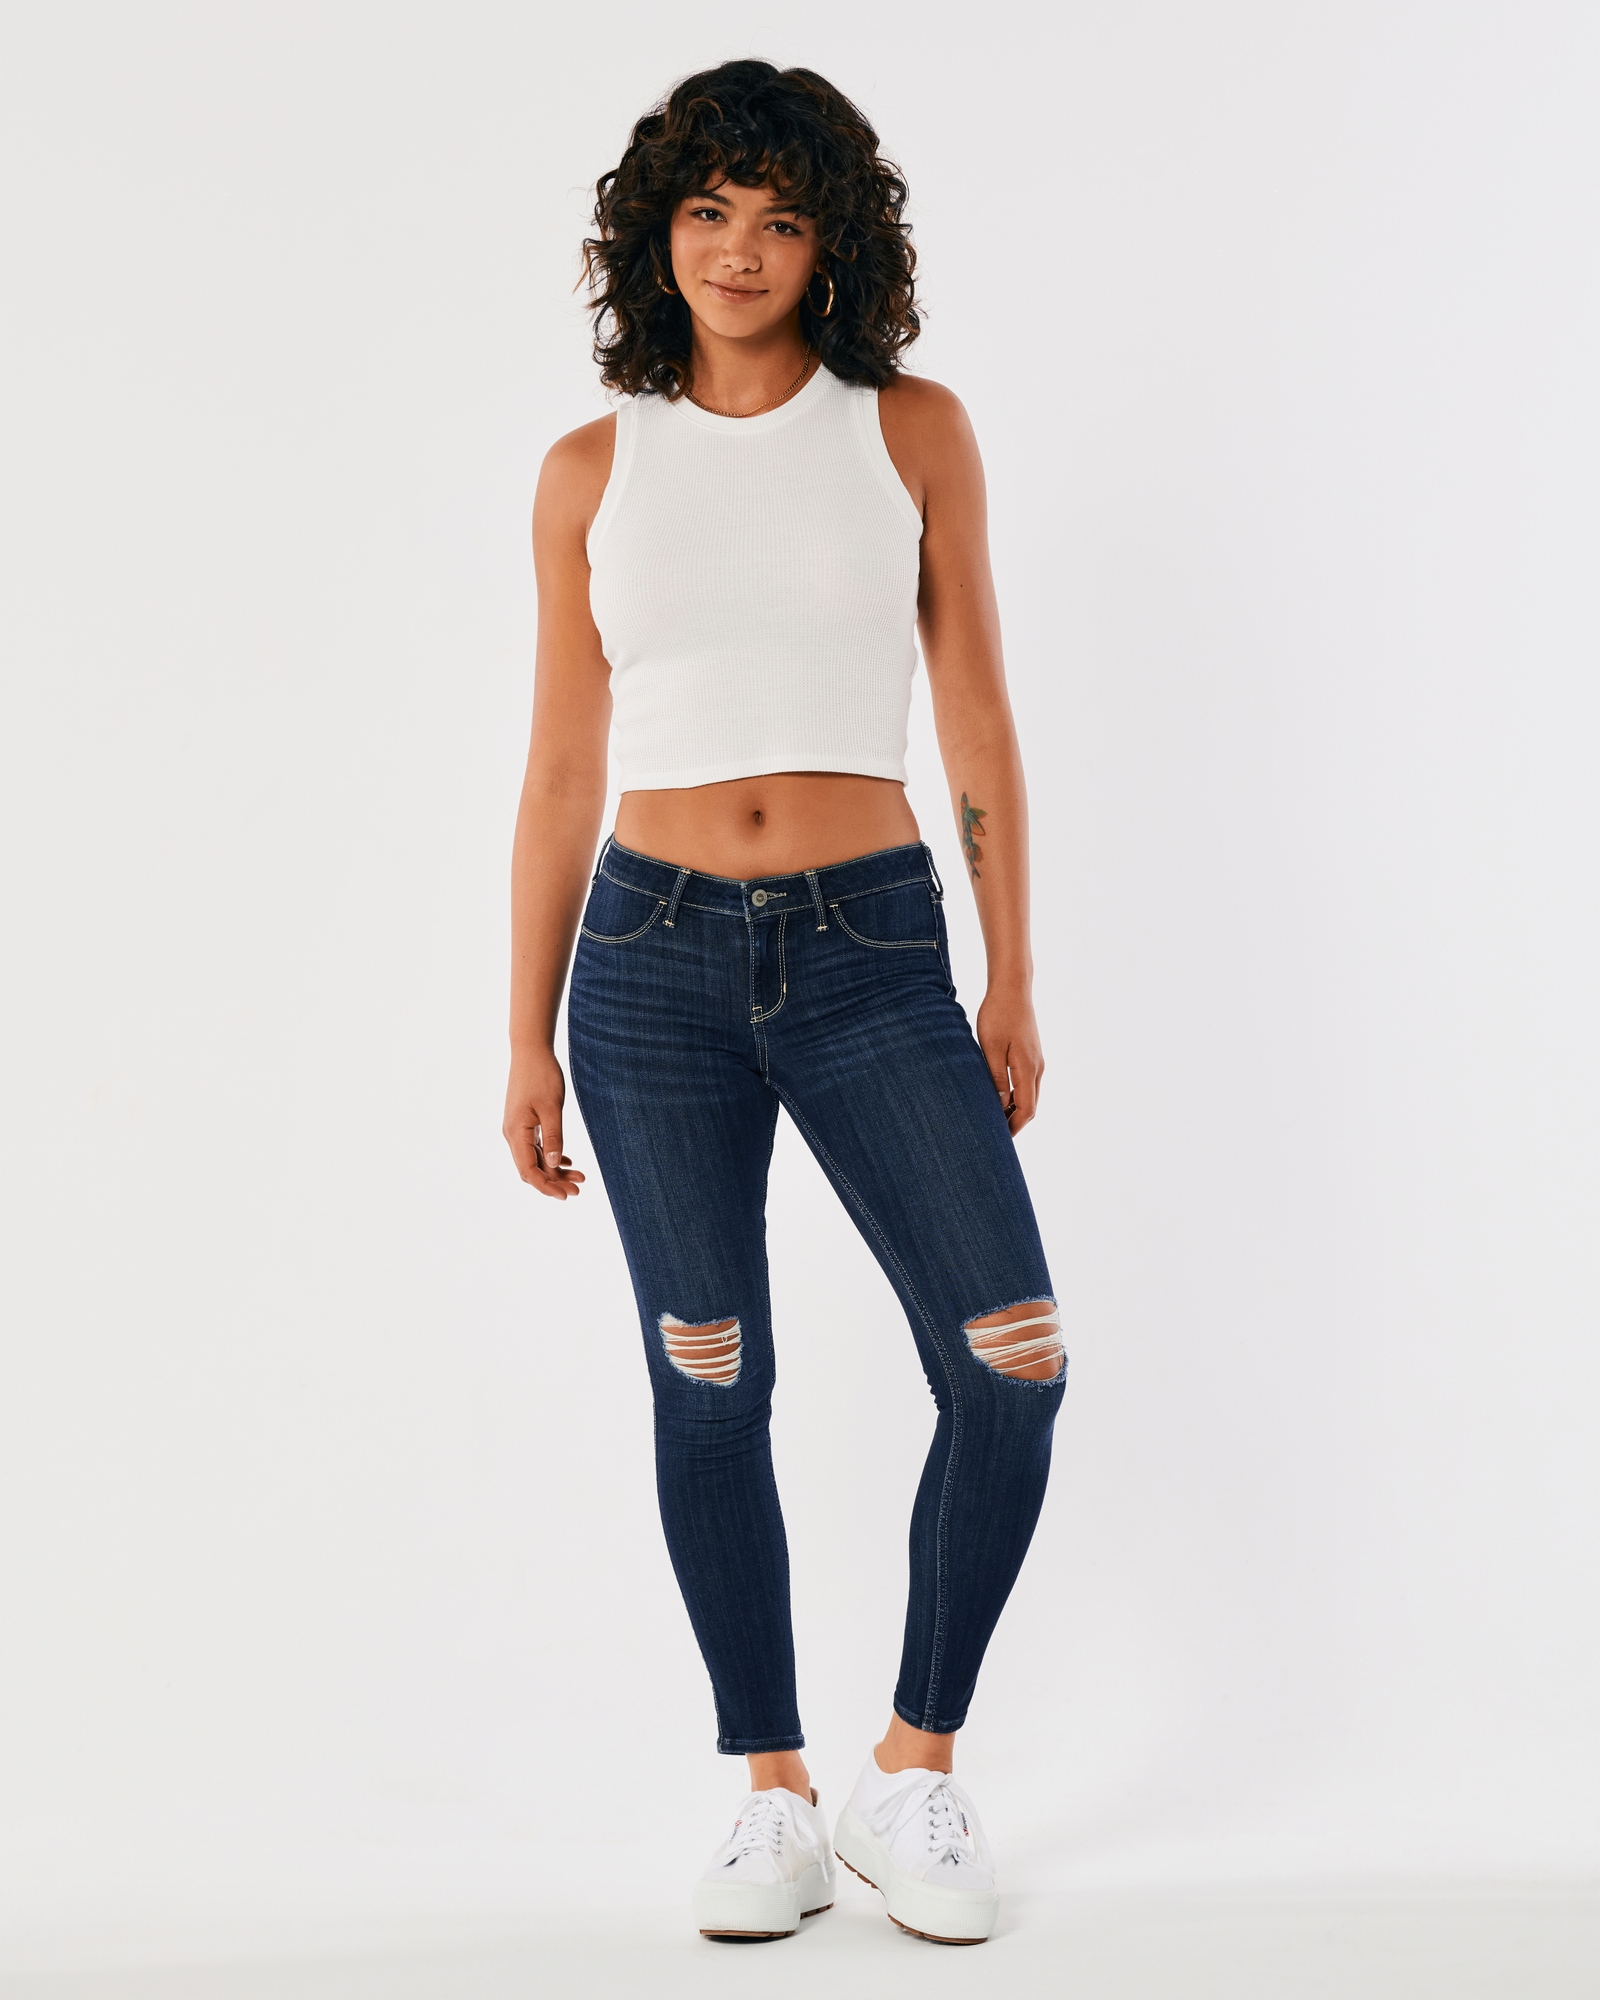 https://img.hollisterco.com/is/image/anf/KIC_355-1271-0678-278_model1.jpg?policy=product-extra-large